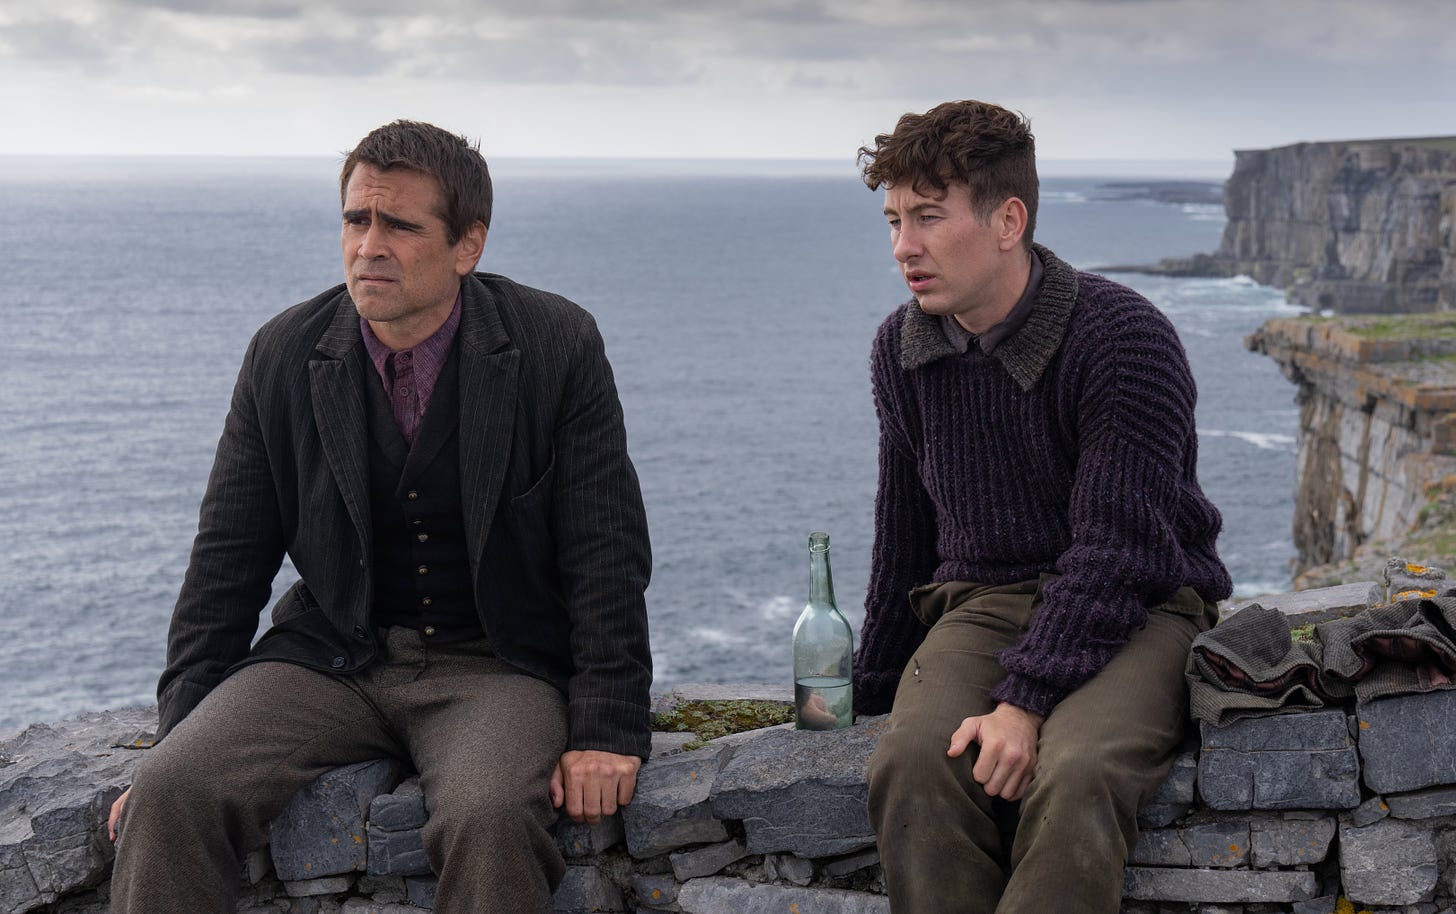 Colin Farrell as Pádraic Súilleabháin (left) and Barry Keoghan as Dominic Kearney (right) in THE BANSHEES OF INISHERIN.